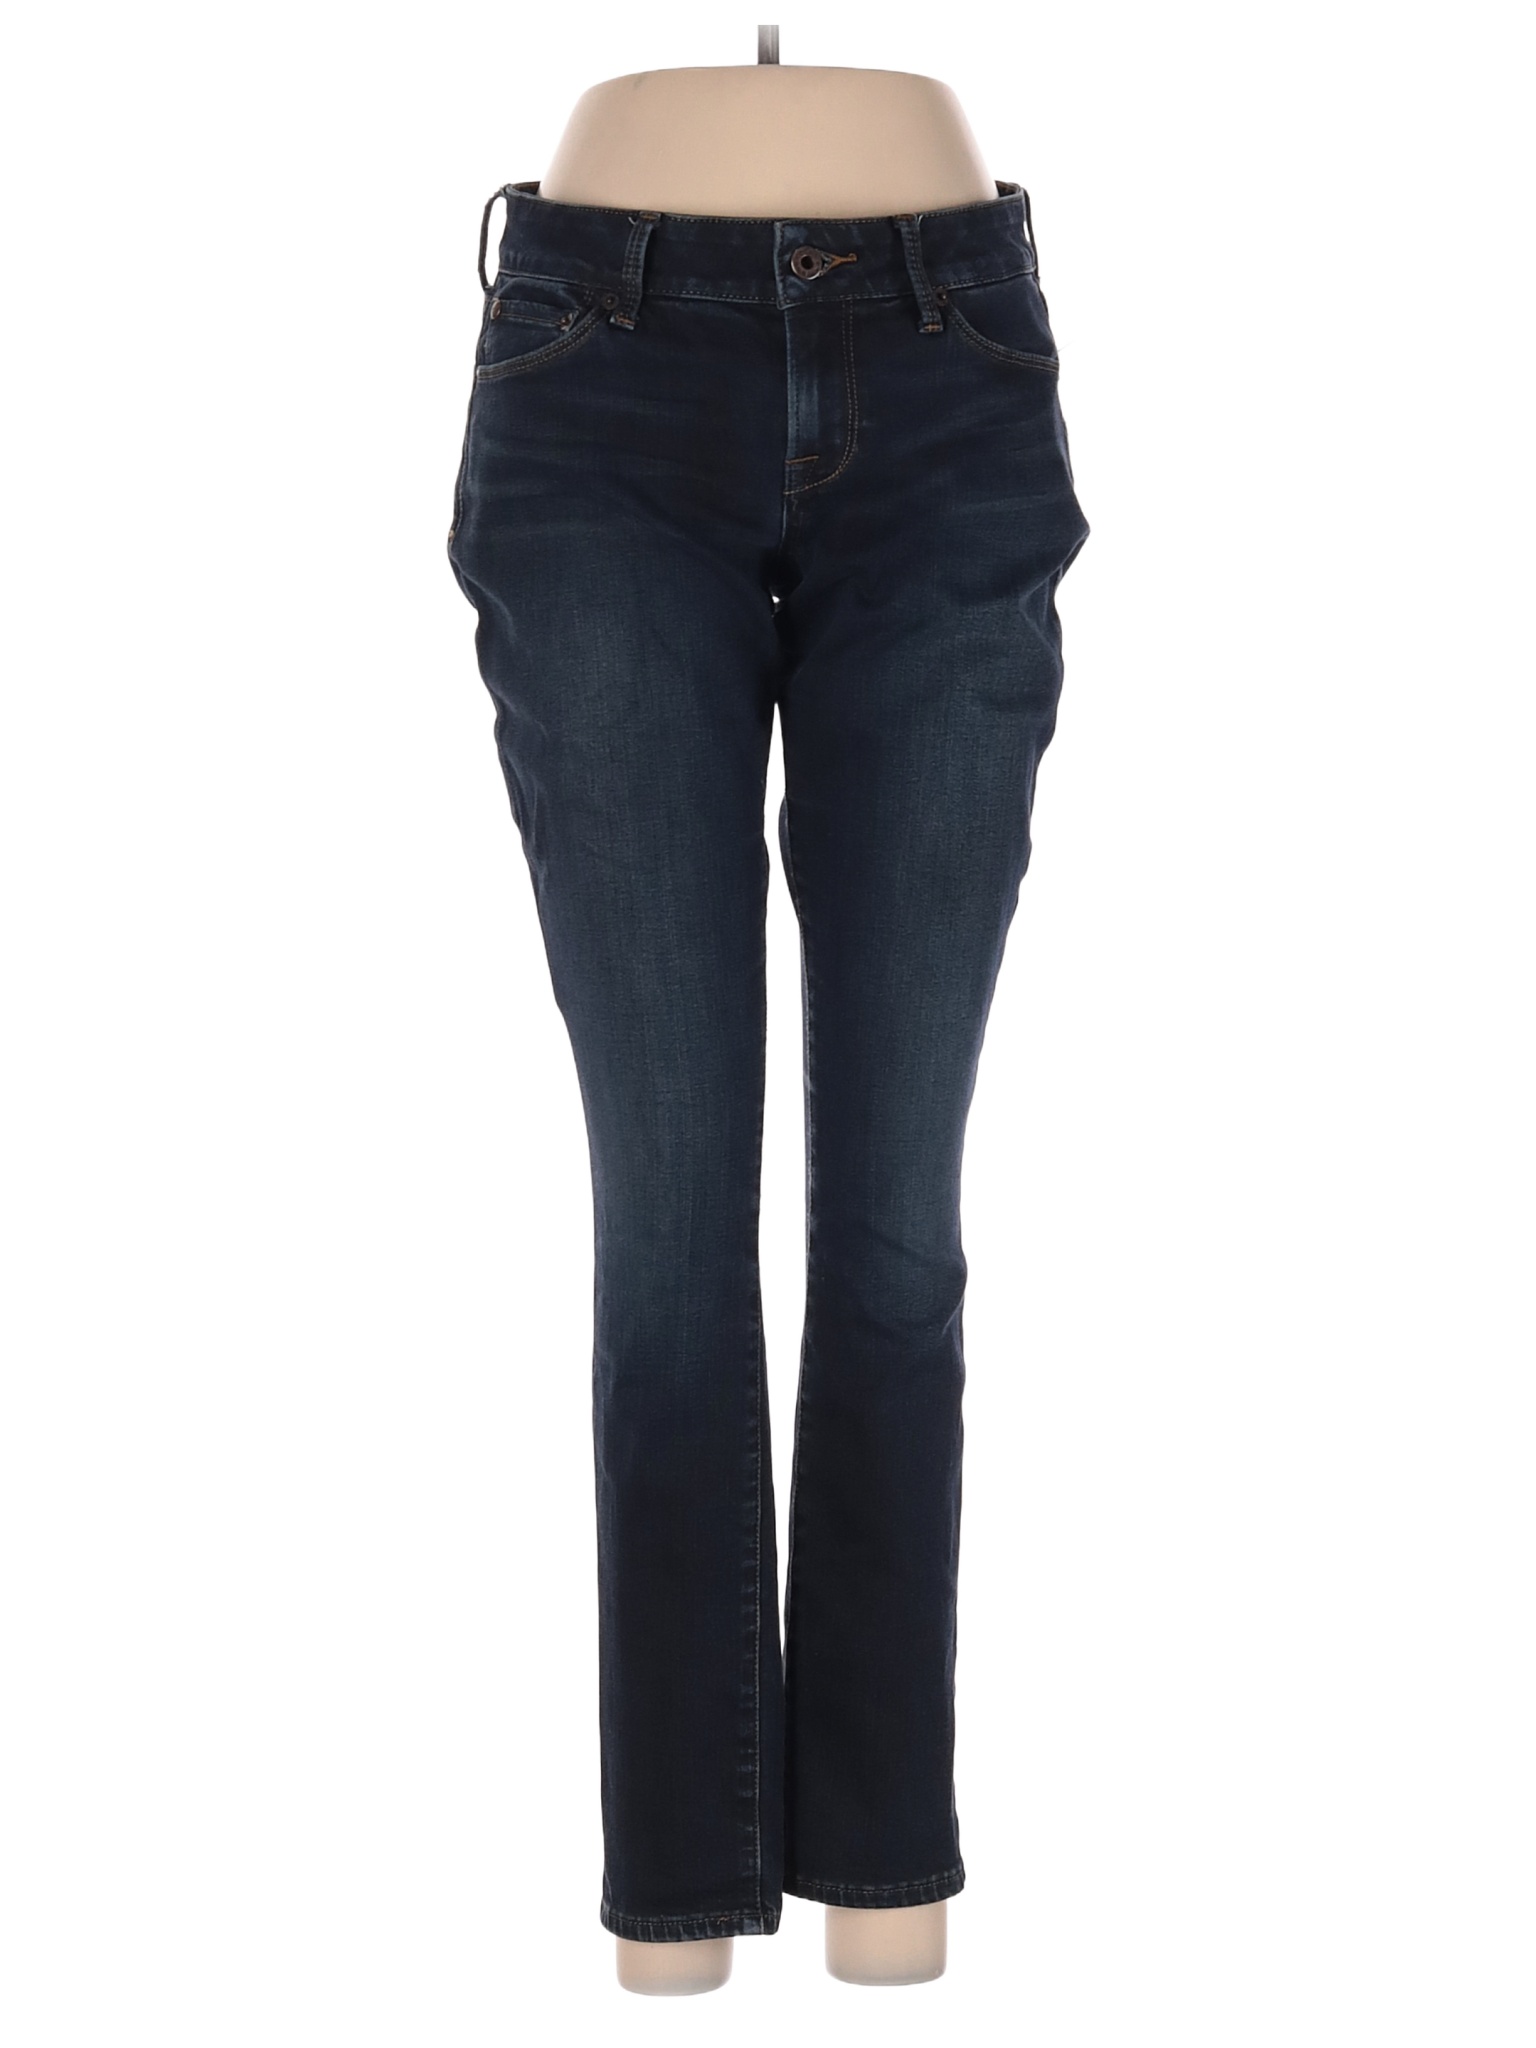 Lucky Brand 100% Cotton Solid Blue Jeans Size 2 - 68% off